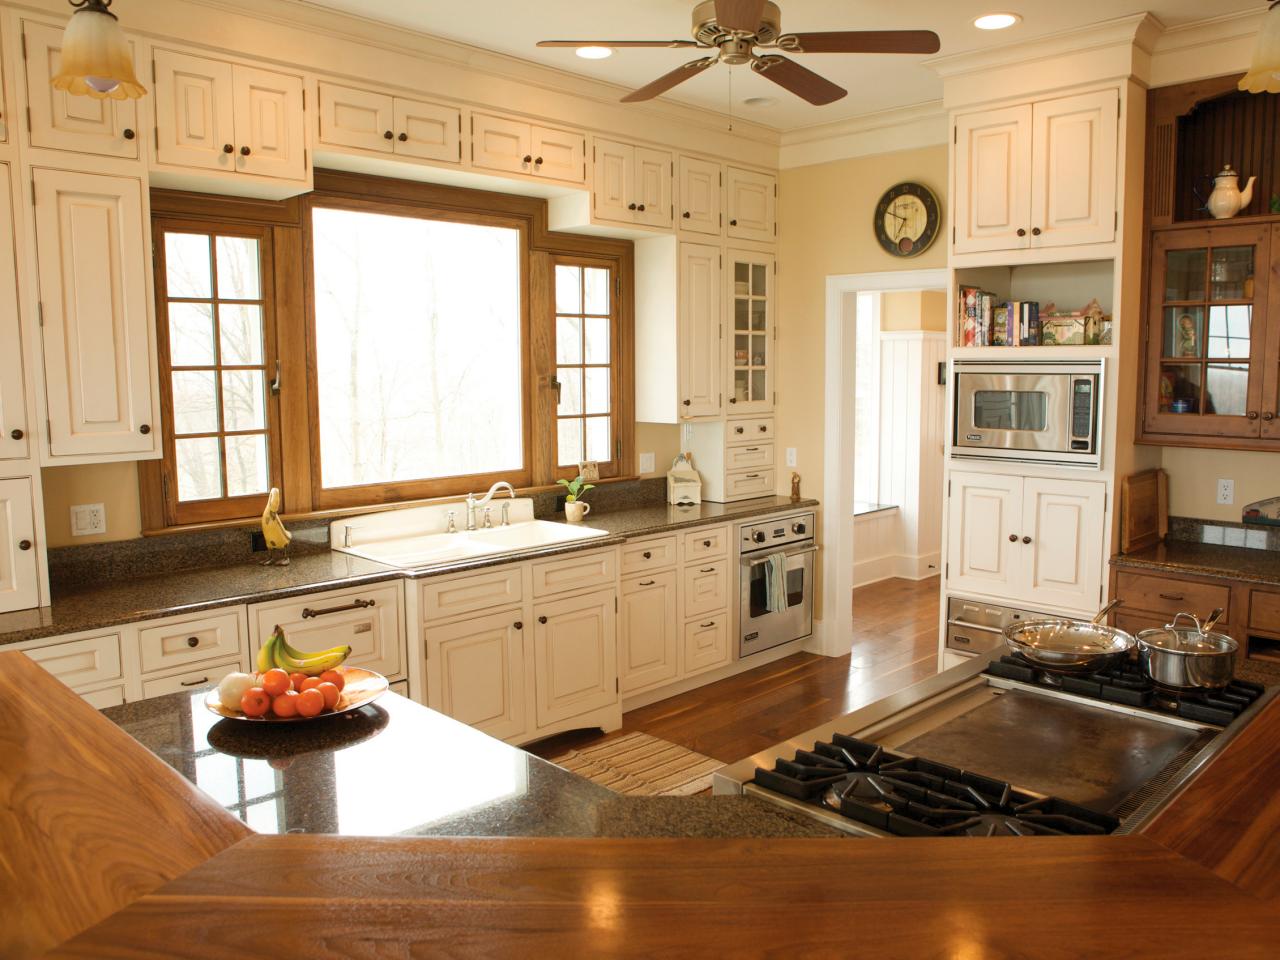 Kitchen Bay Window Ideas Pictures Ideas And Tips From Hgtv Hgtv